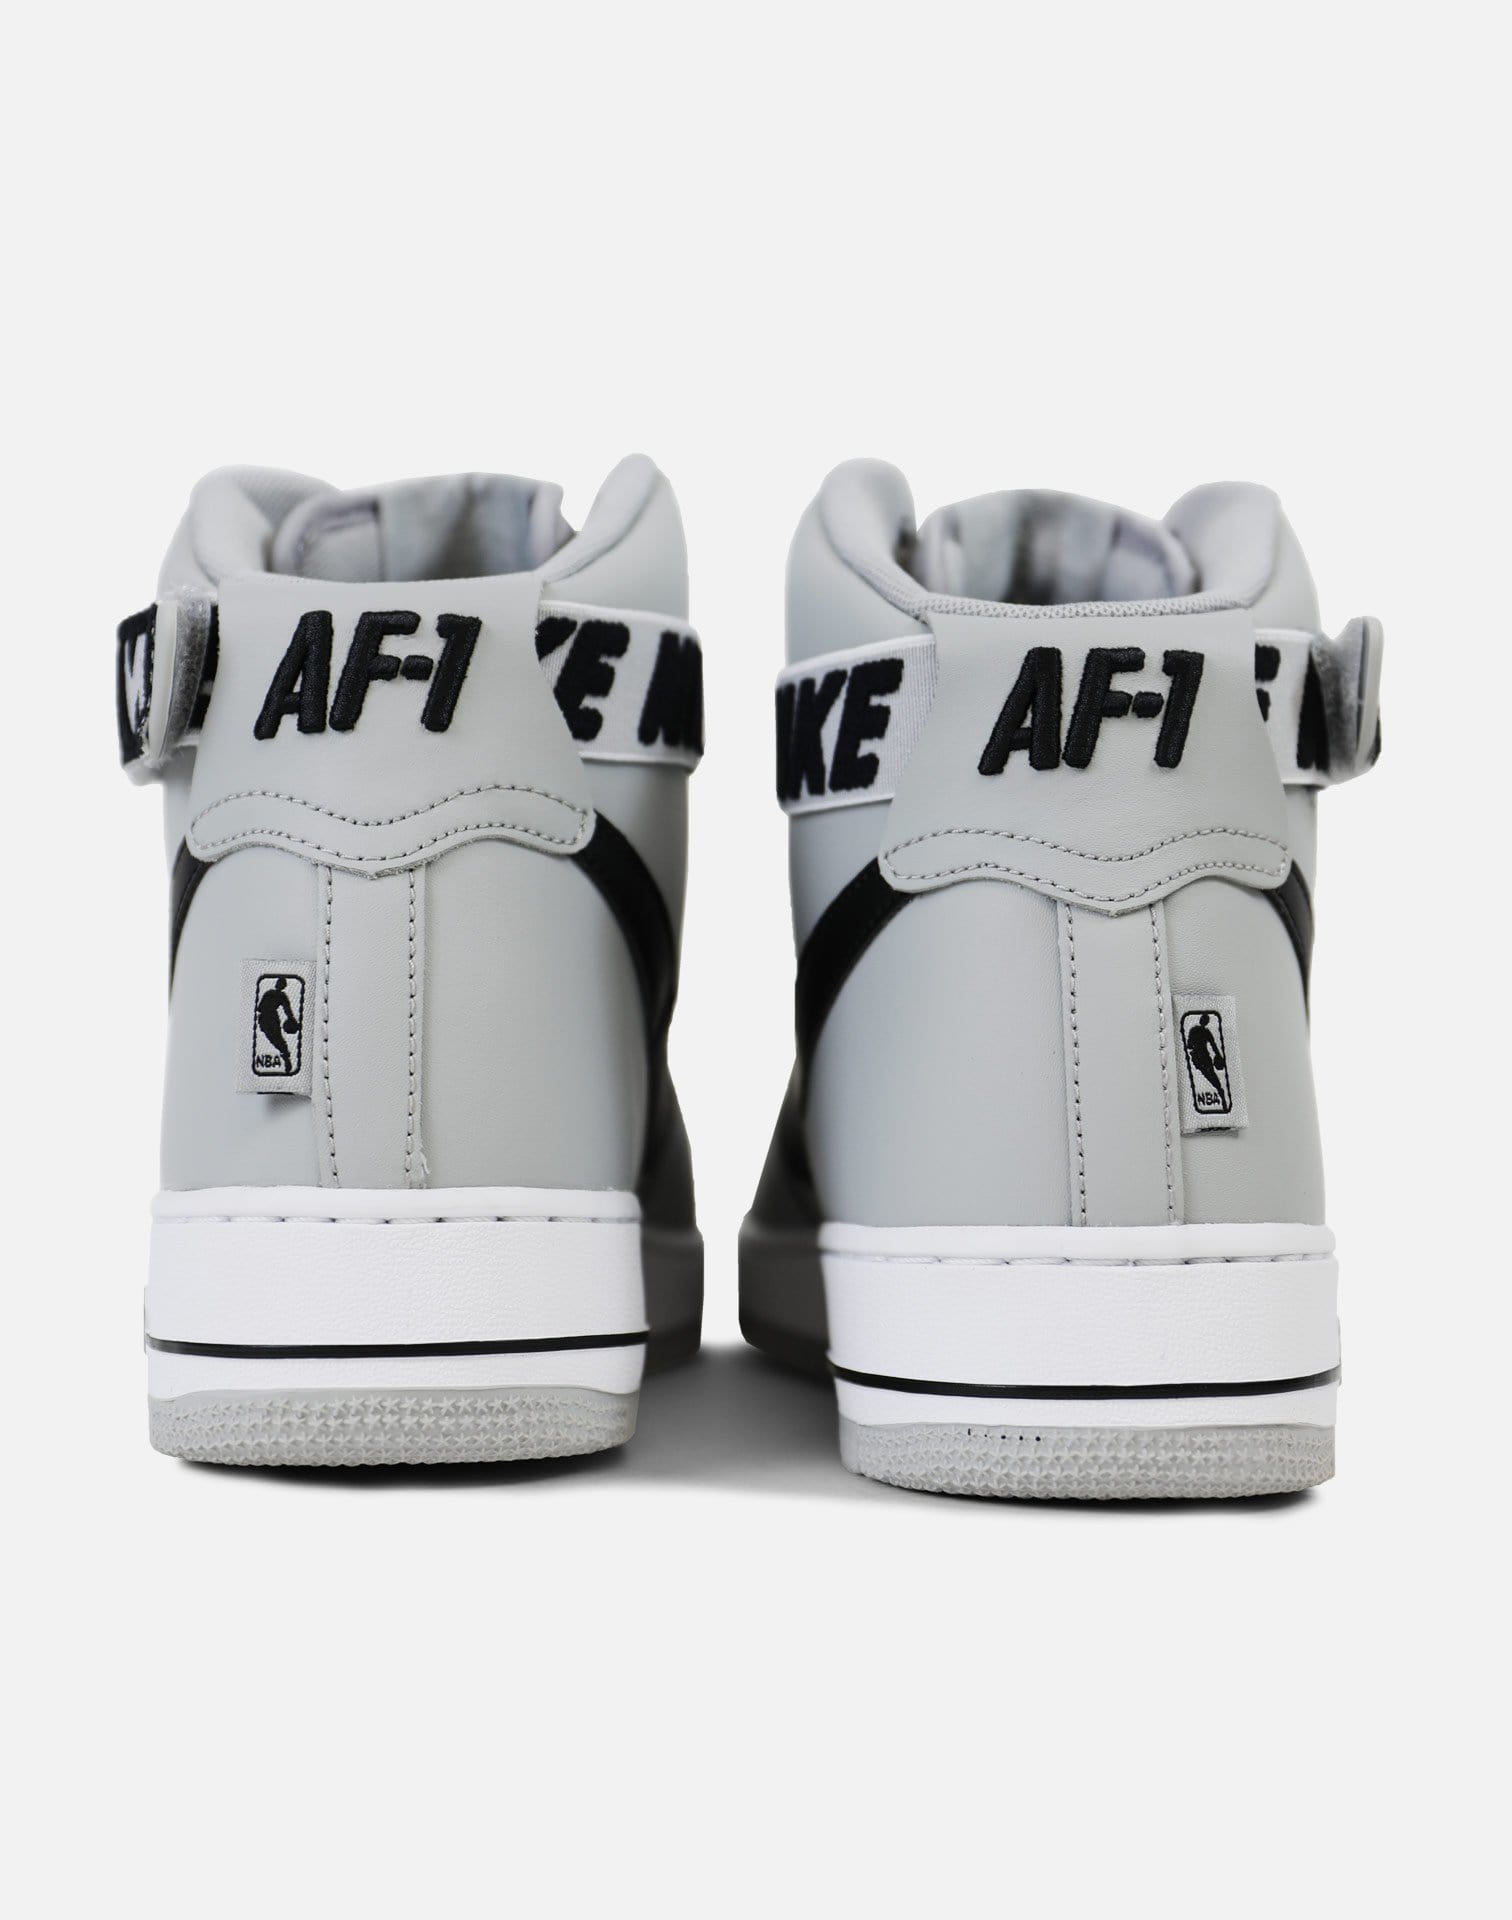 Nike Air Force 1 '07 High LV8 'Statement Game' (Flight Silver/Black-White)